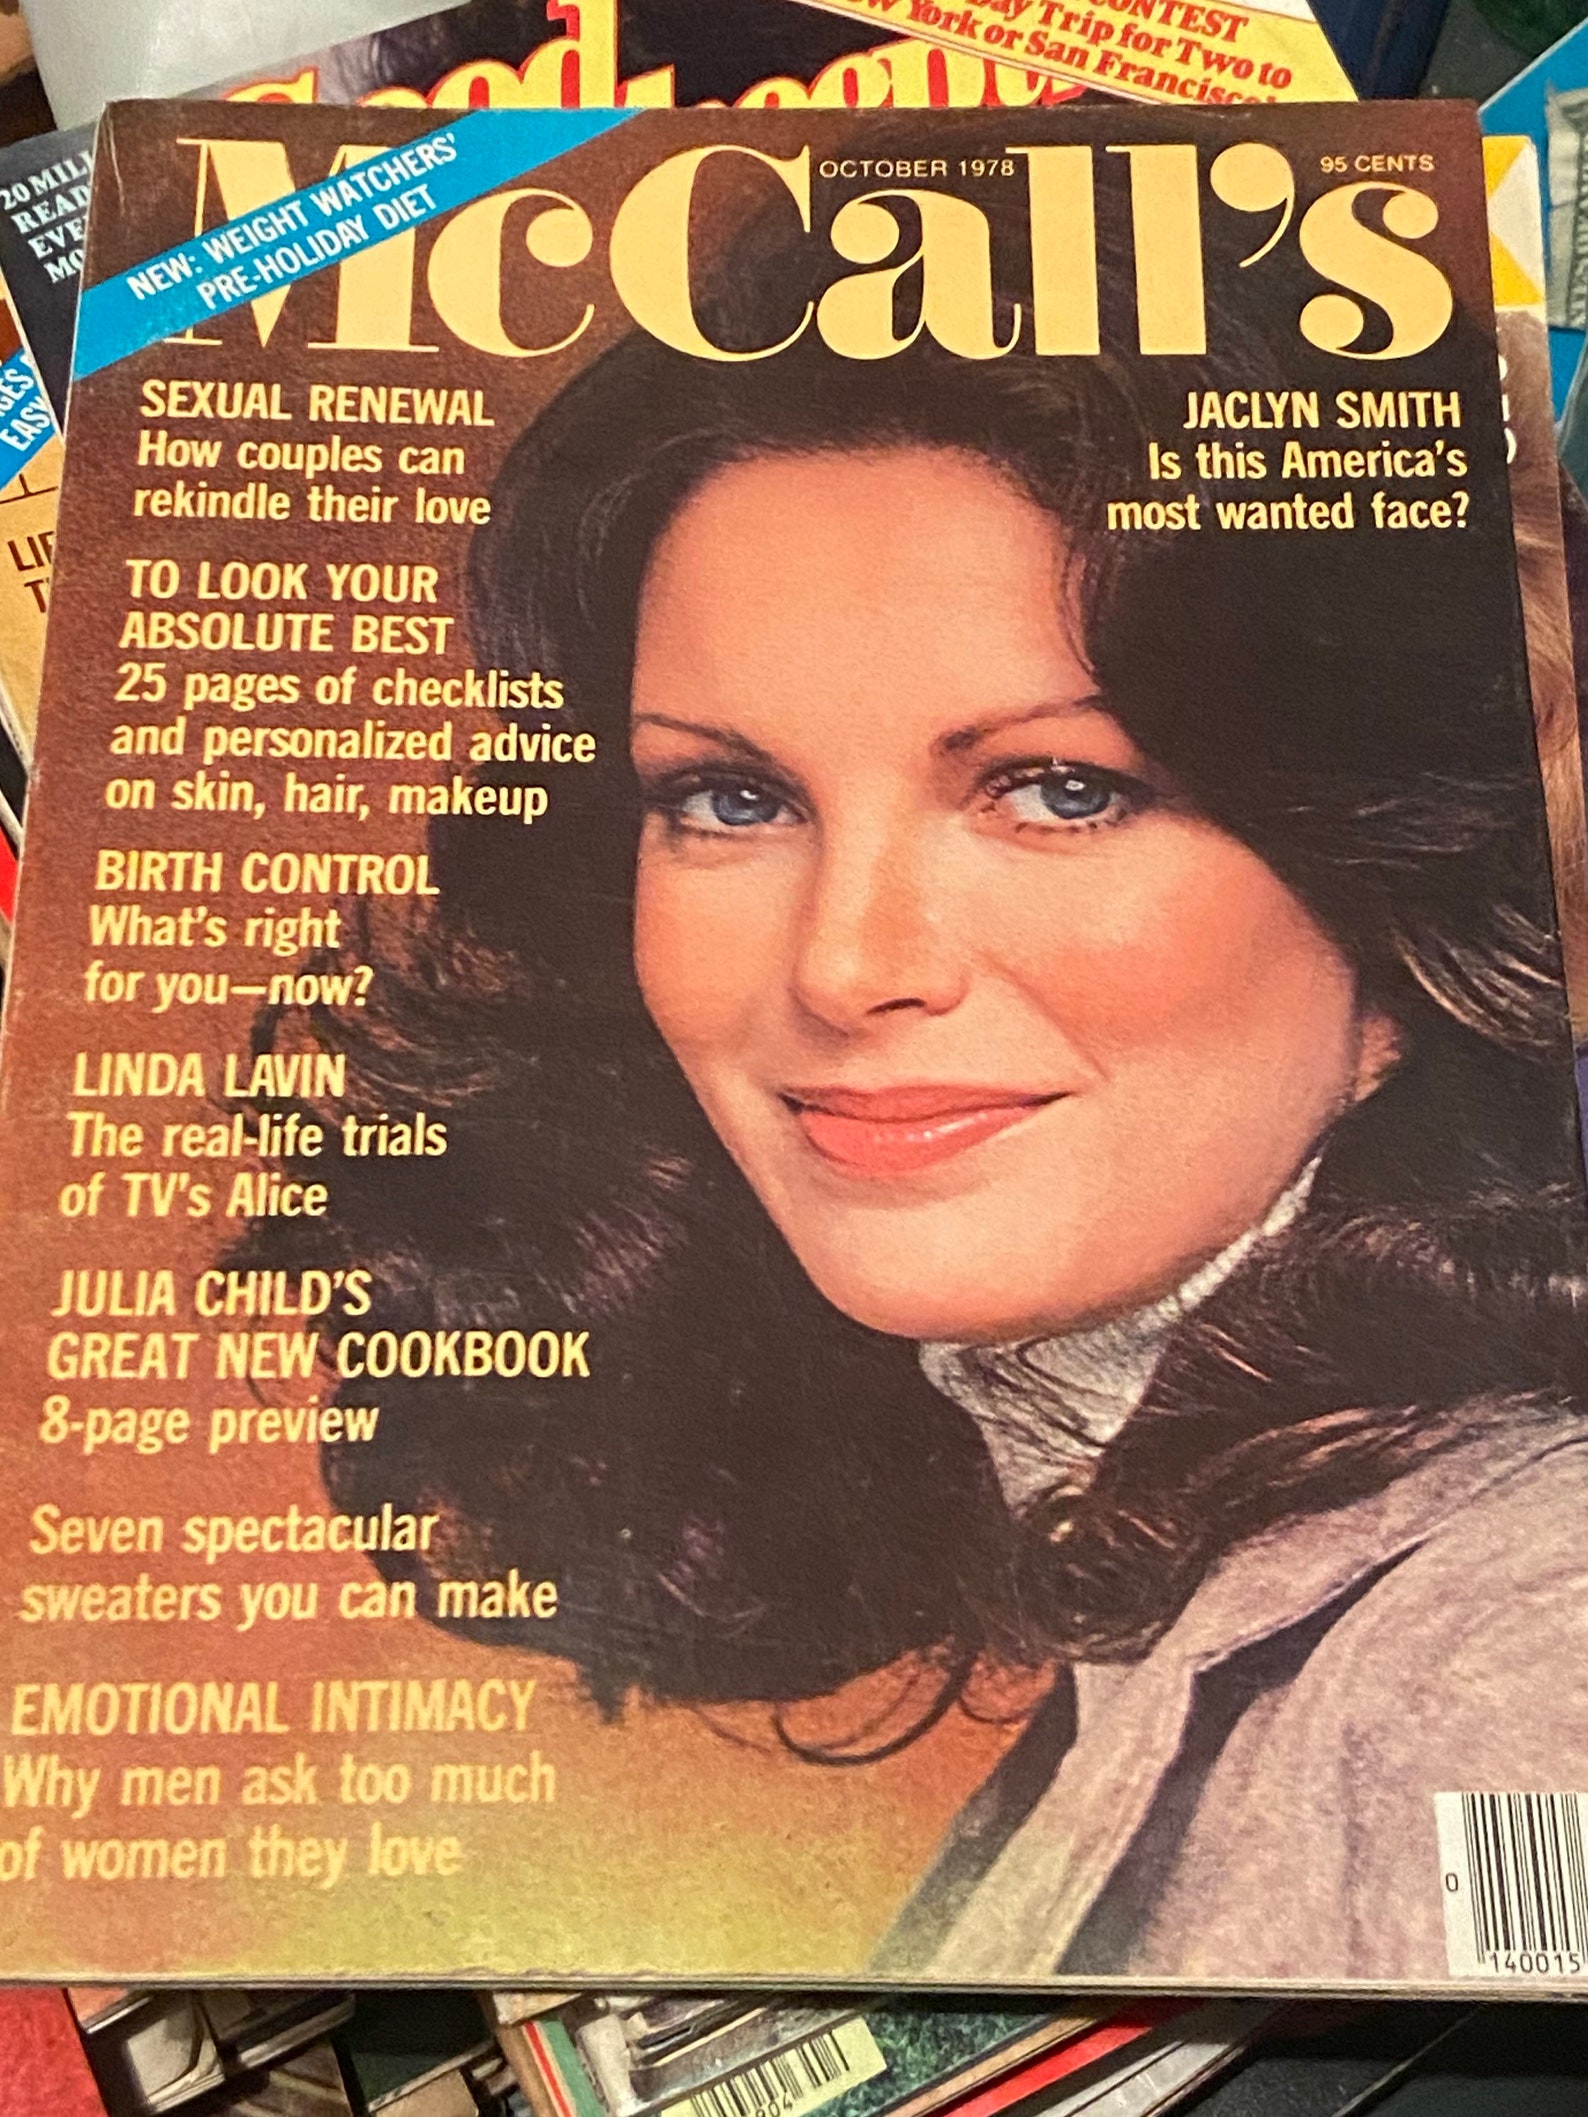 McCalls October 1978. Jaclyn Smith cover. | Etsy